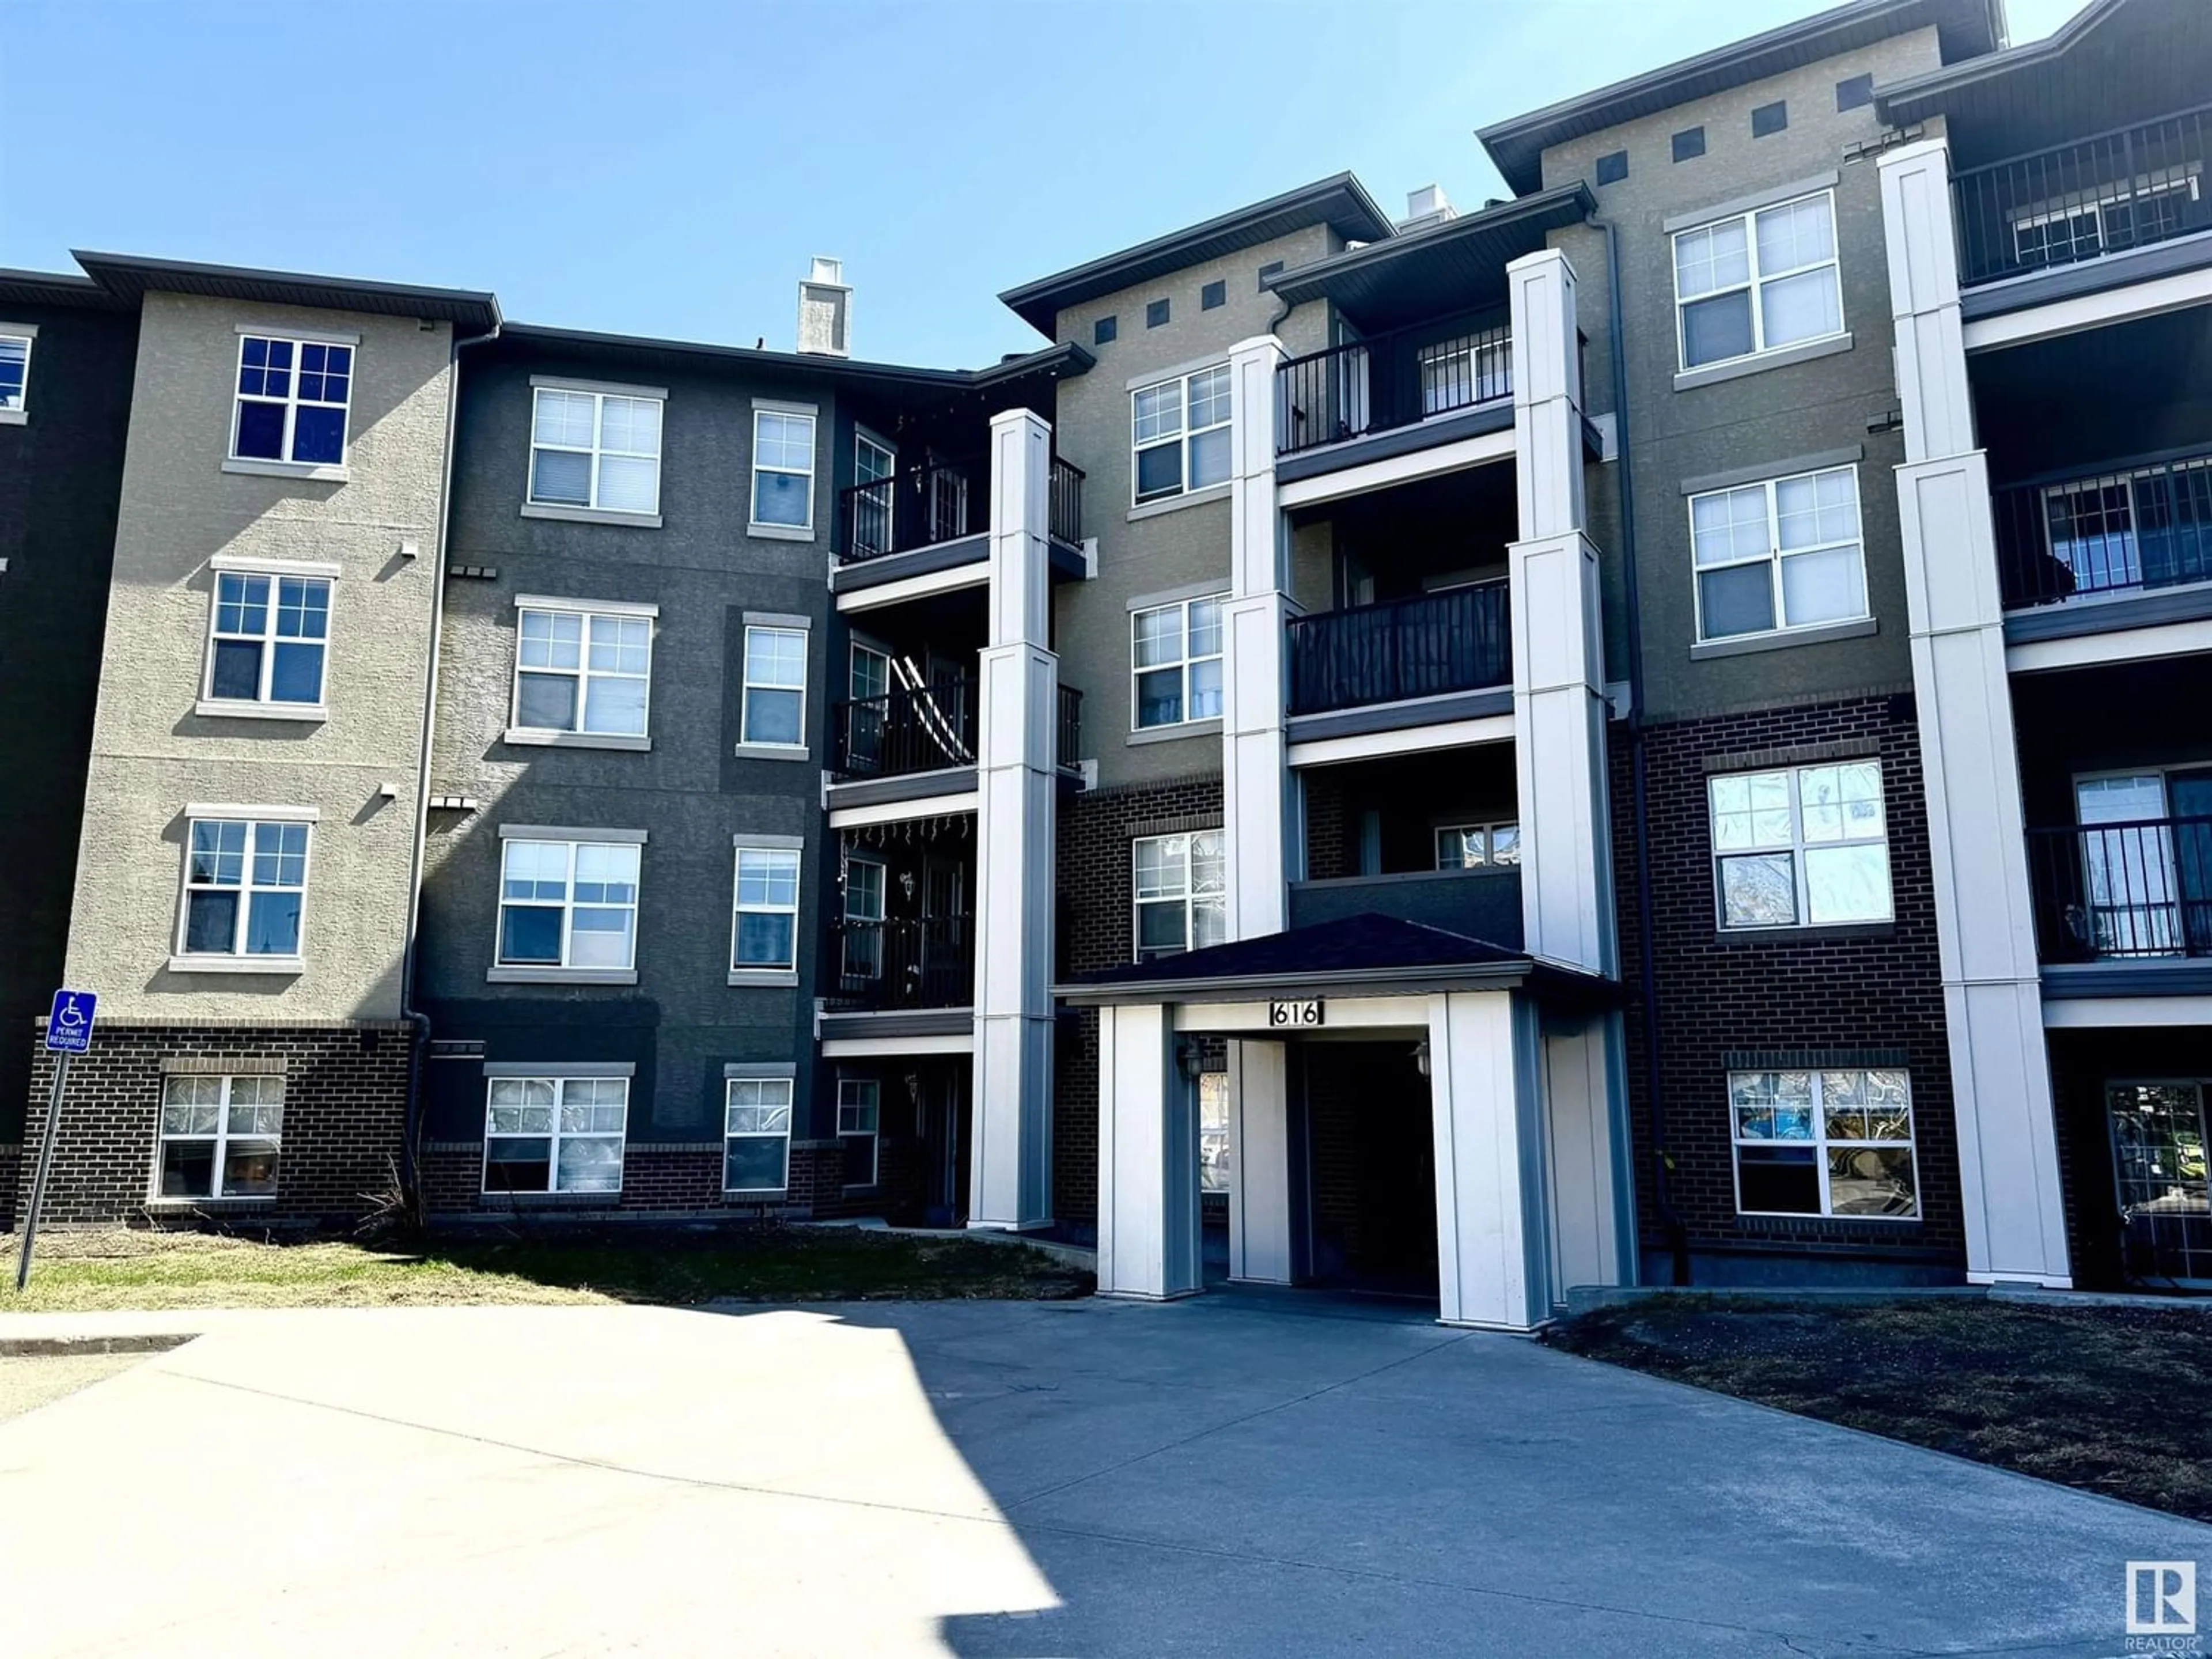 A pic from exterior of the house or condo for #104 616 MCALLISTER LO SW, Edmonton Alberta T6W1N1